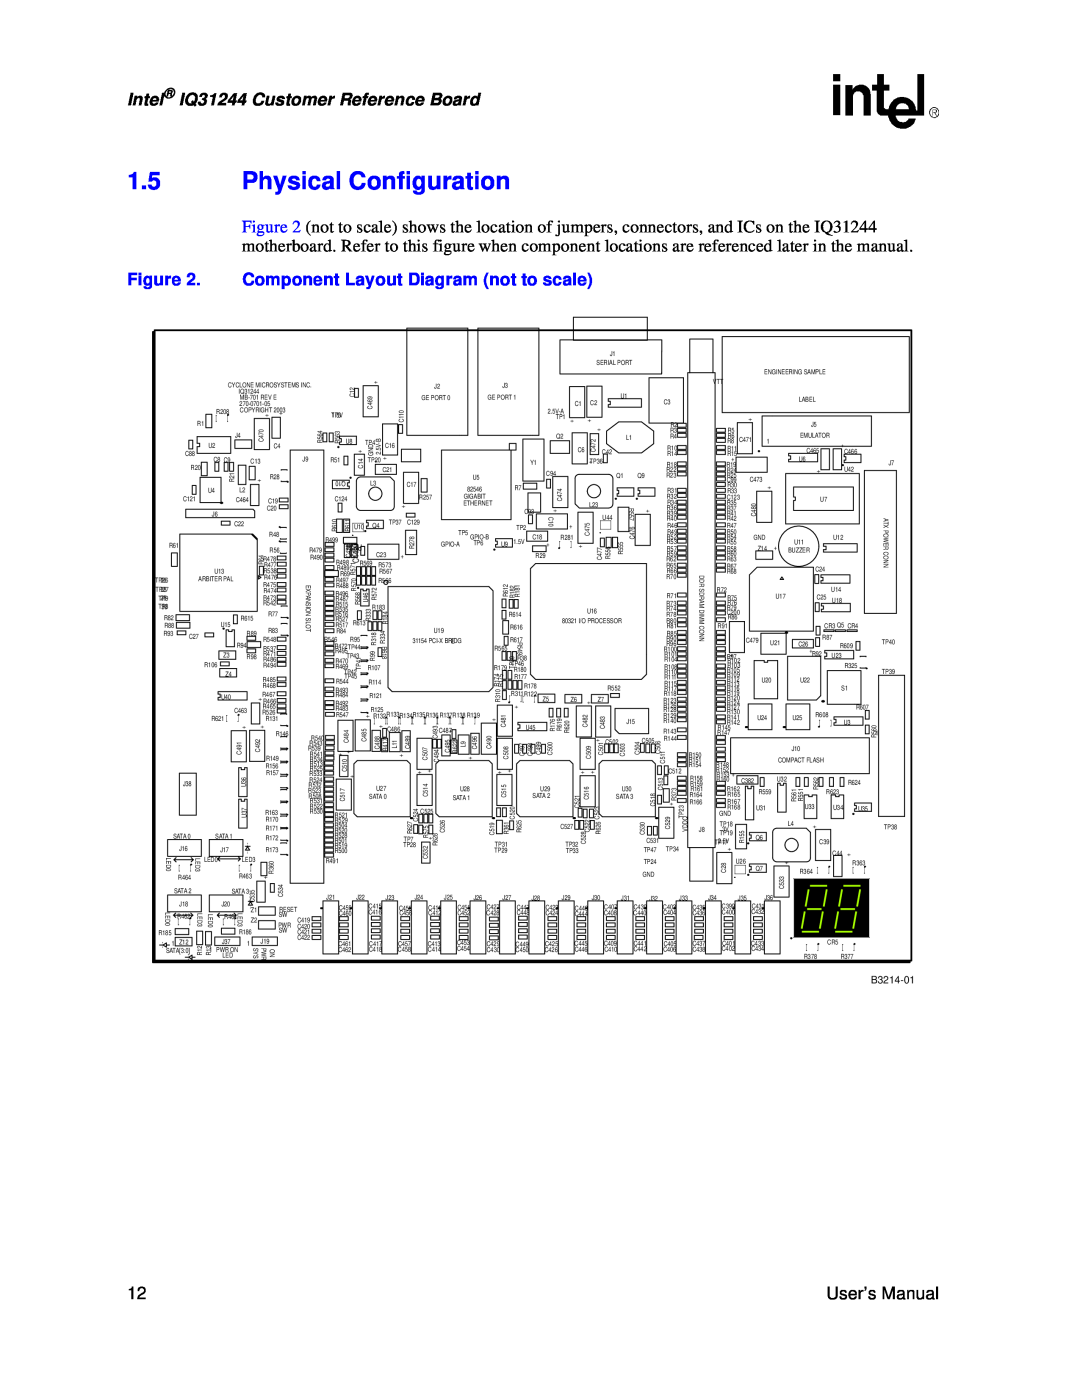 Intel 1.5Physical Configuration, Component Layout Diagram not to scale, Intel IQ31244 Customer Reference Board, R274 